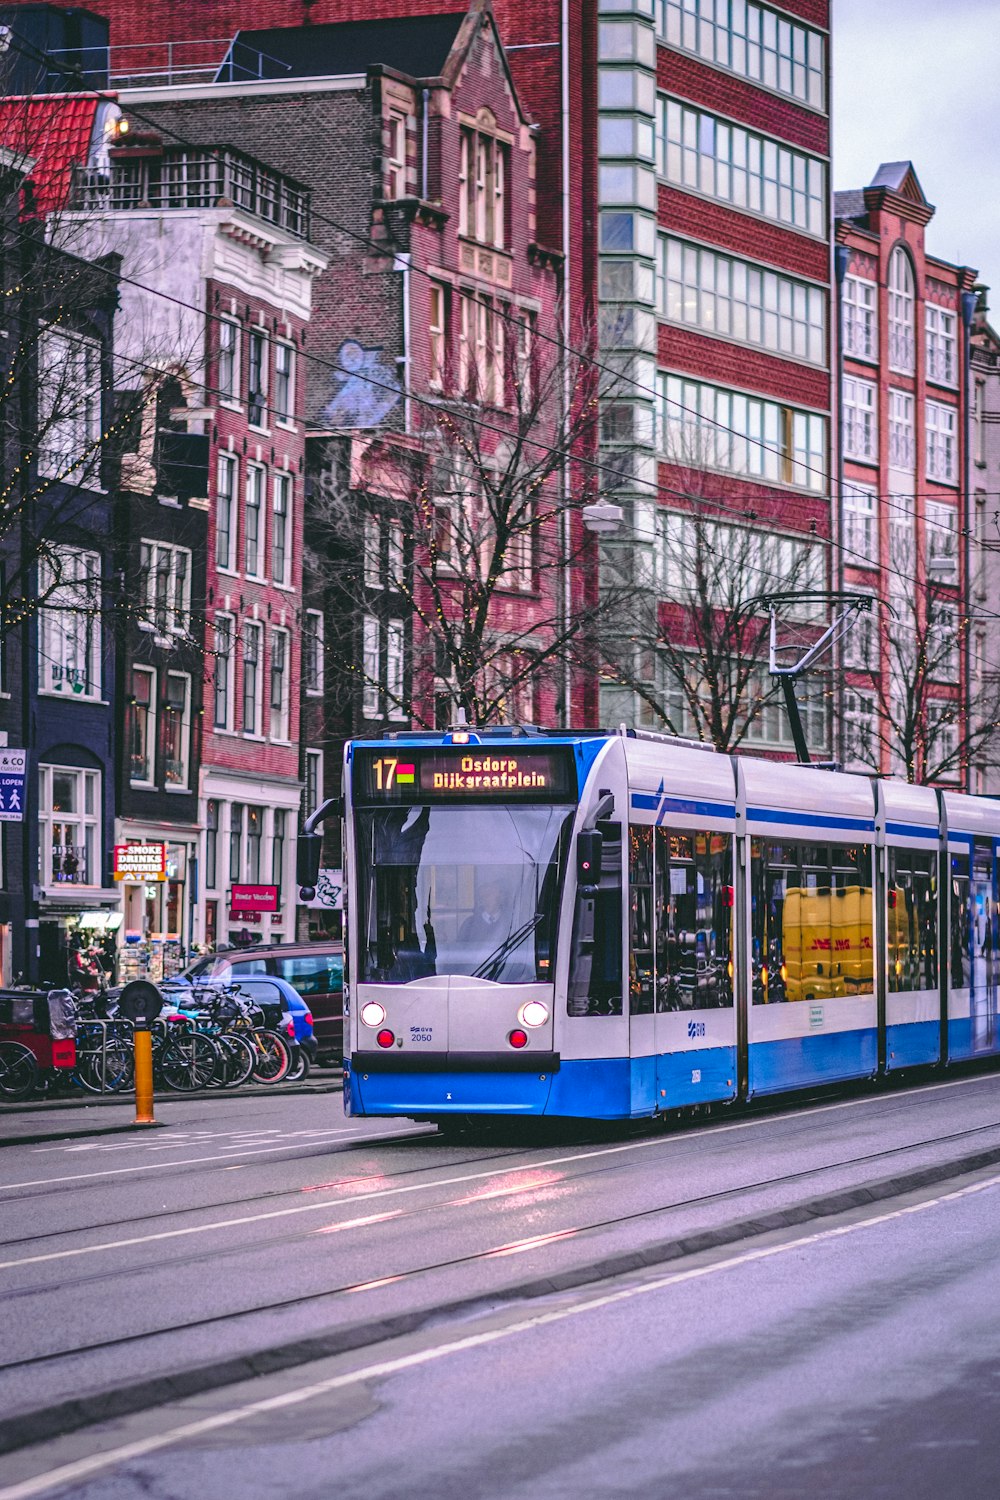 blue and white tram on road near building during daytime